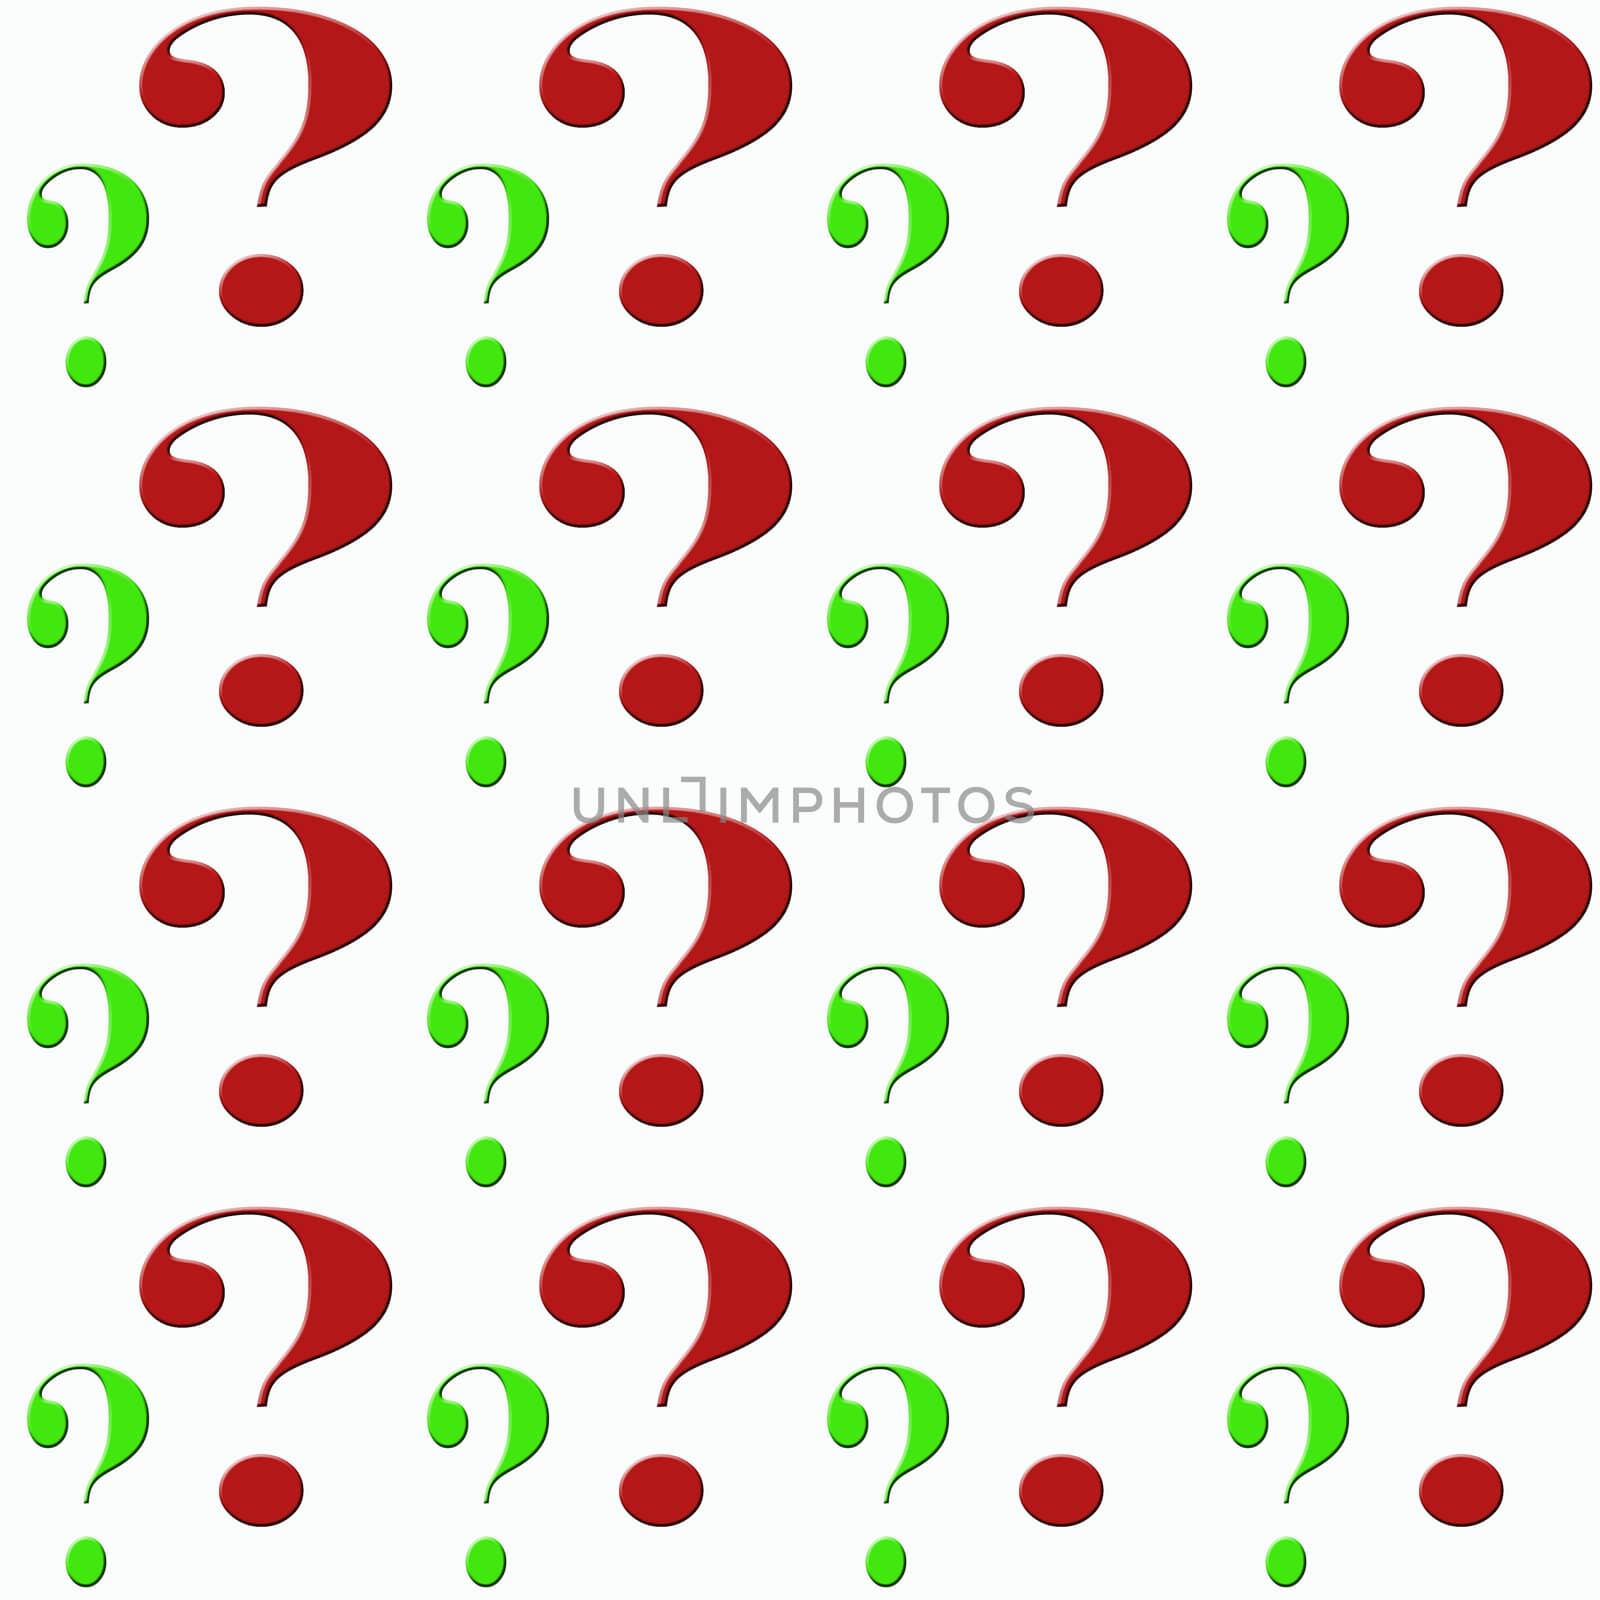 Question mark pattern on white background